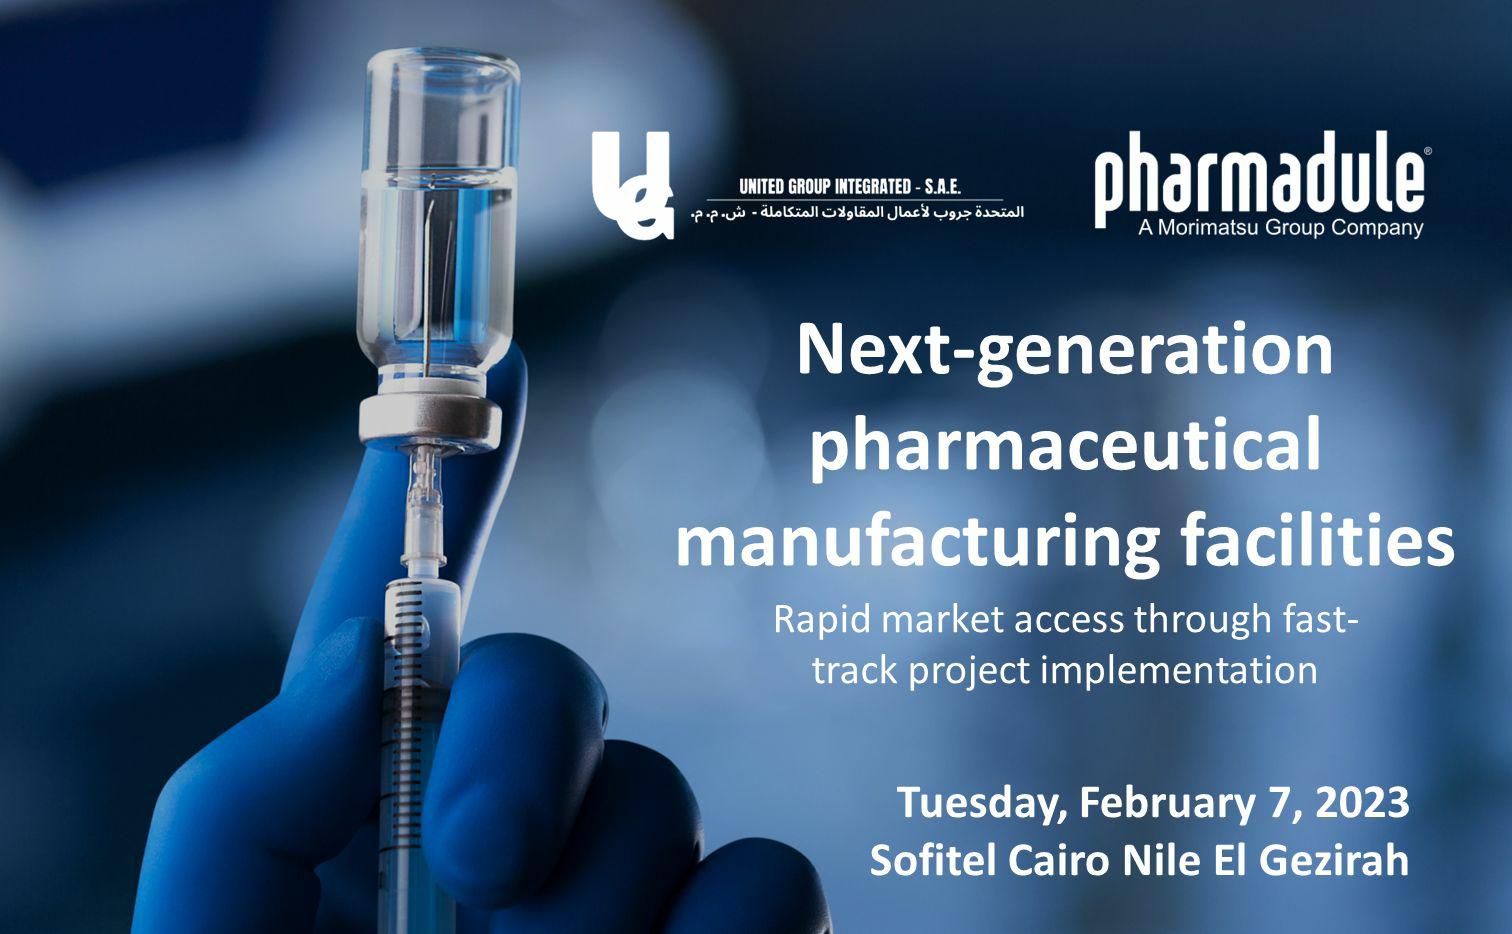 PHARMADULE HOSTS CONFERENCE IN EGYPT